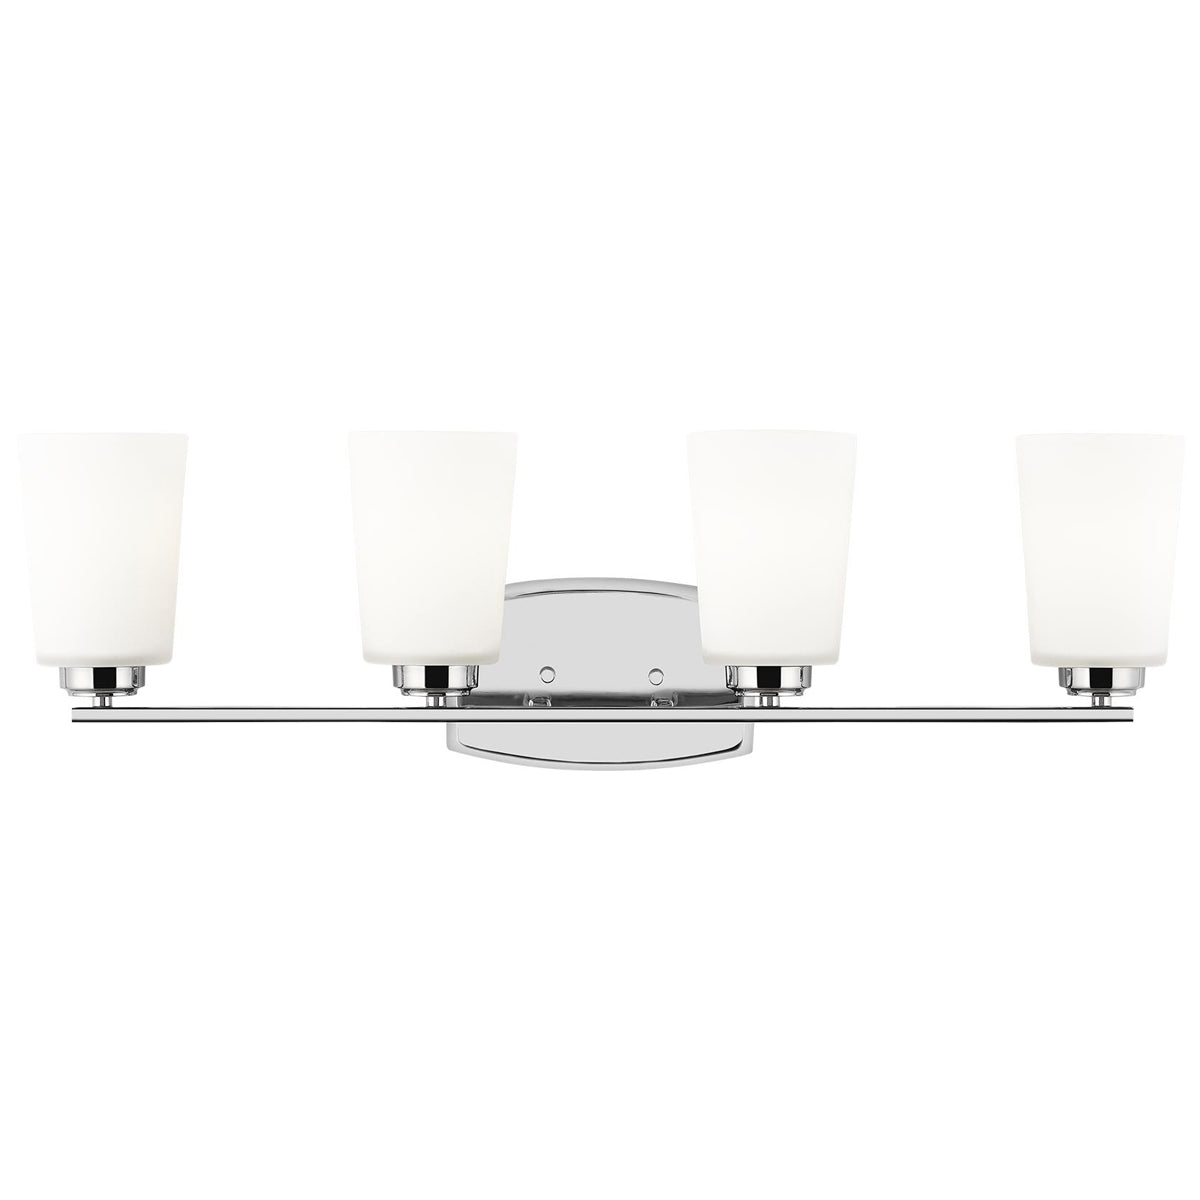 Sea Gull Lighting Franport 4-Light Wall/Bath Sconce without Bulb